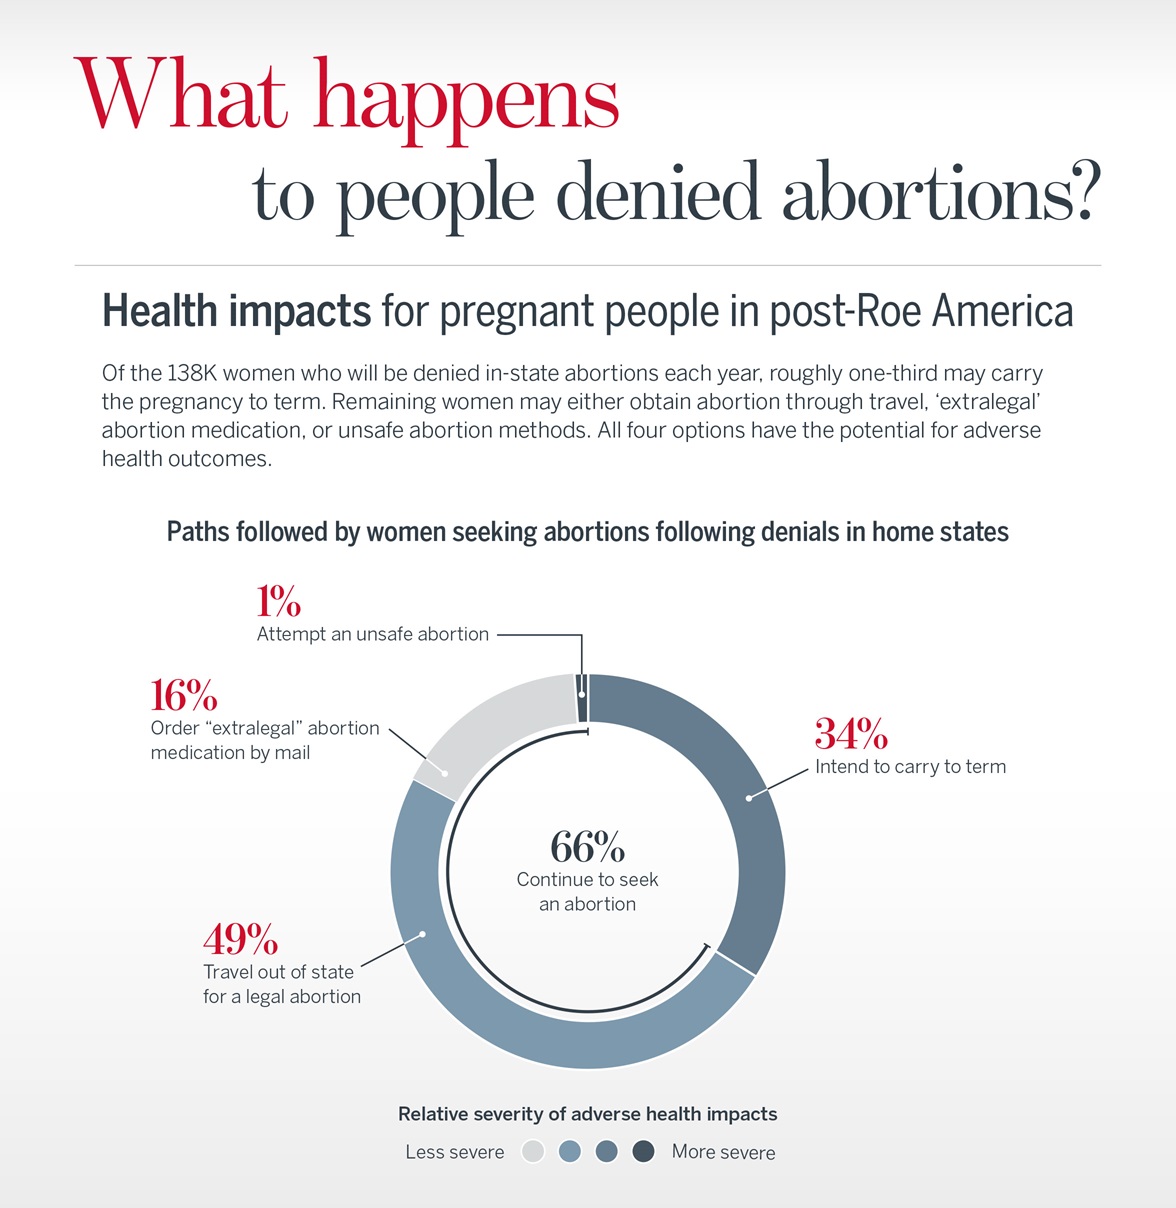 What happens to people denied abortions?